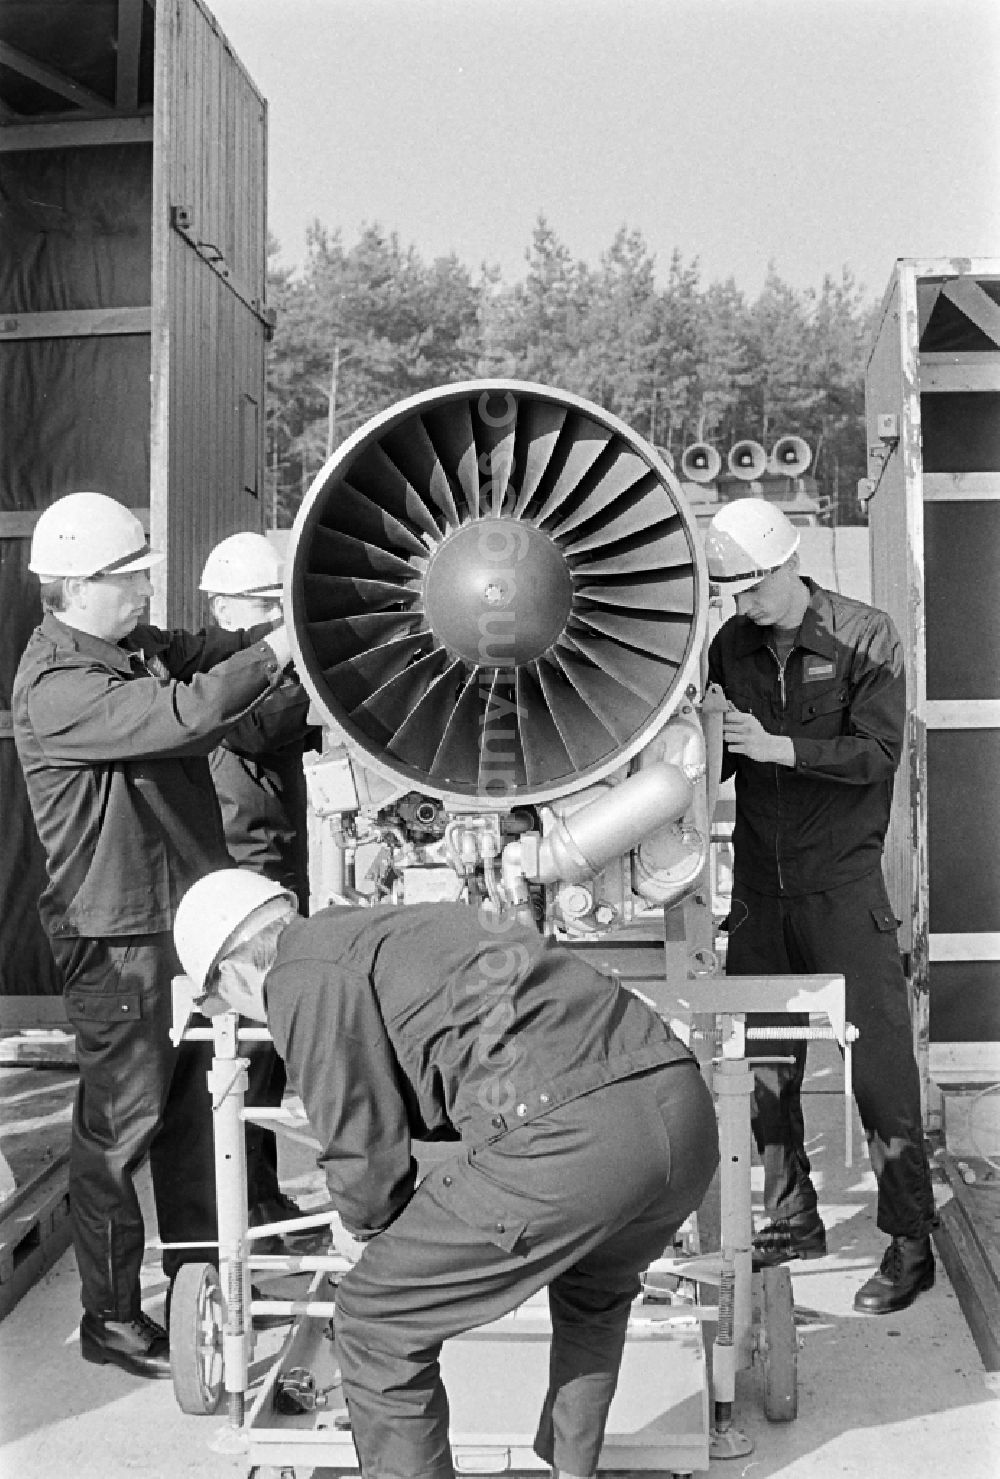 GDR picture archive: Jänschwalde - Destruction, dismantling of flight technology and equipment of the MiG-21 PFM weapon system as part of a disarmament action at the Drewitz airfield of the fighter pilot squadron Wilhelm Pieck of the air force of the National People's Army NVA office in Jaenschwalde in the state of Brandenburg on the territory of the former GDR, German Democratic Republic